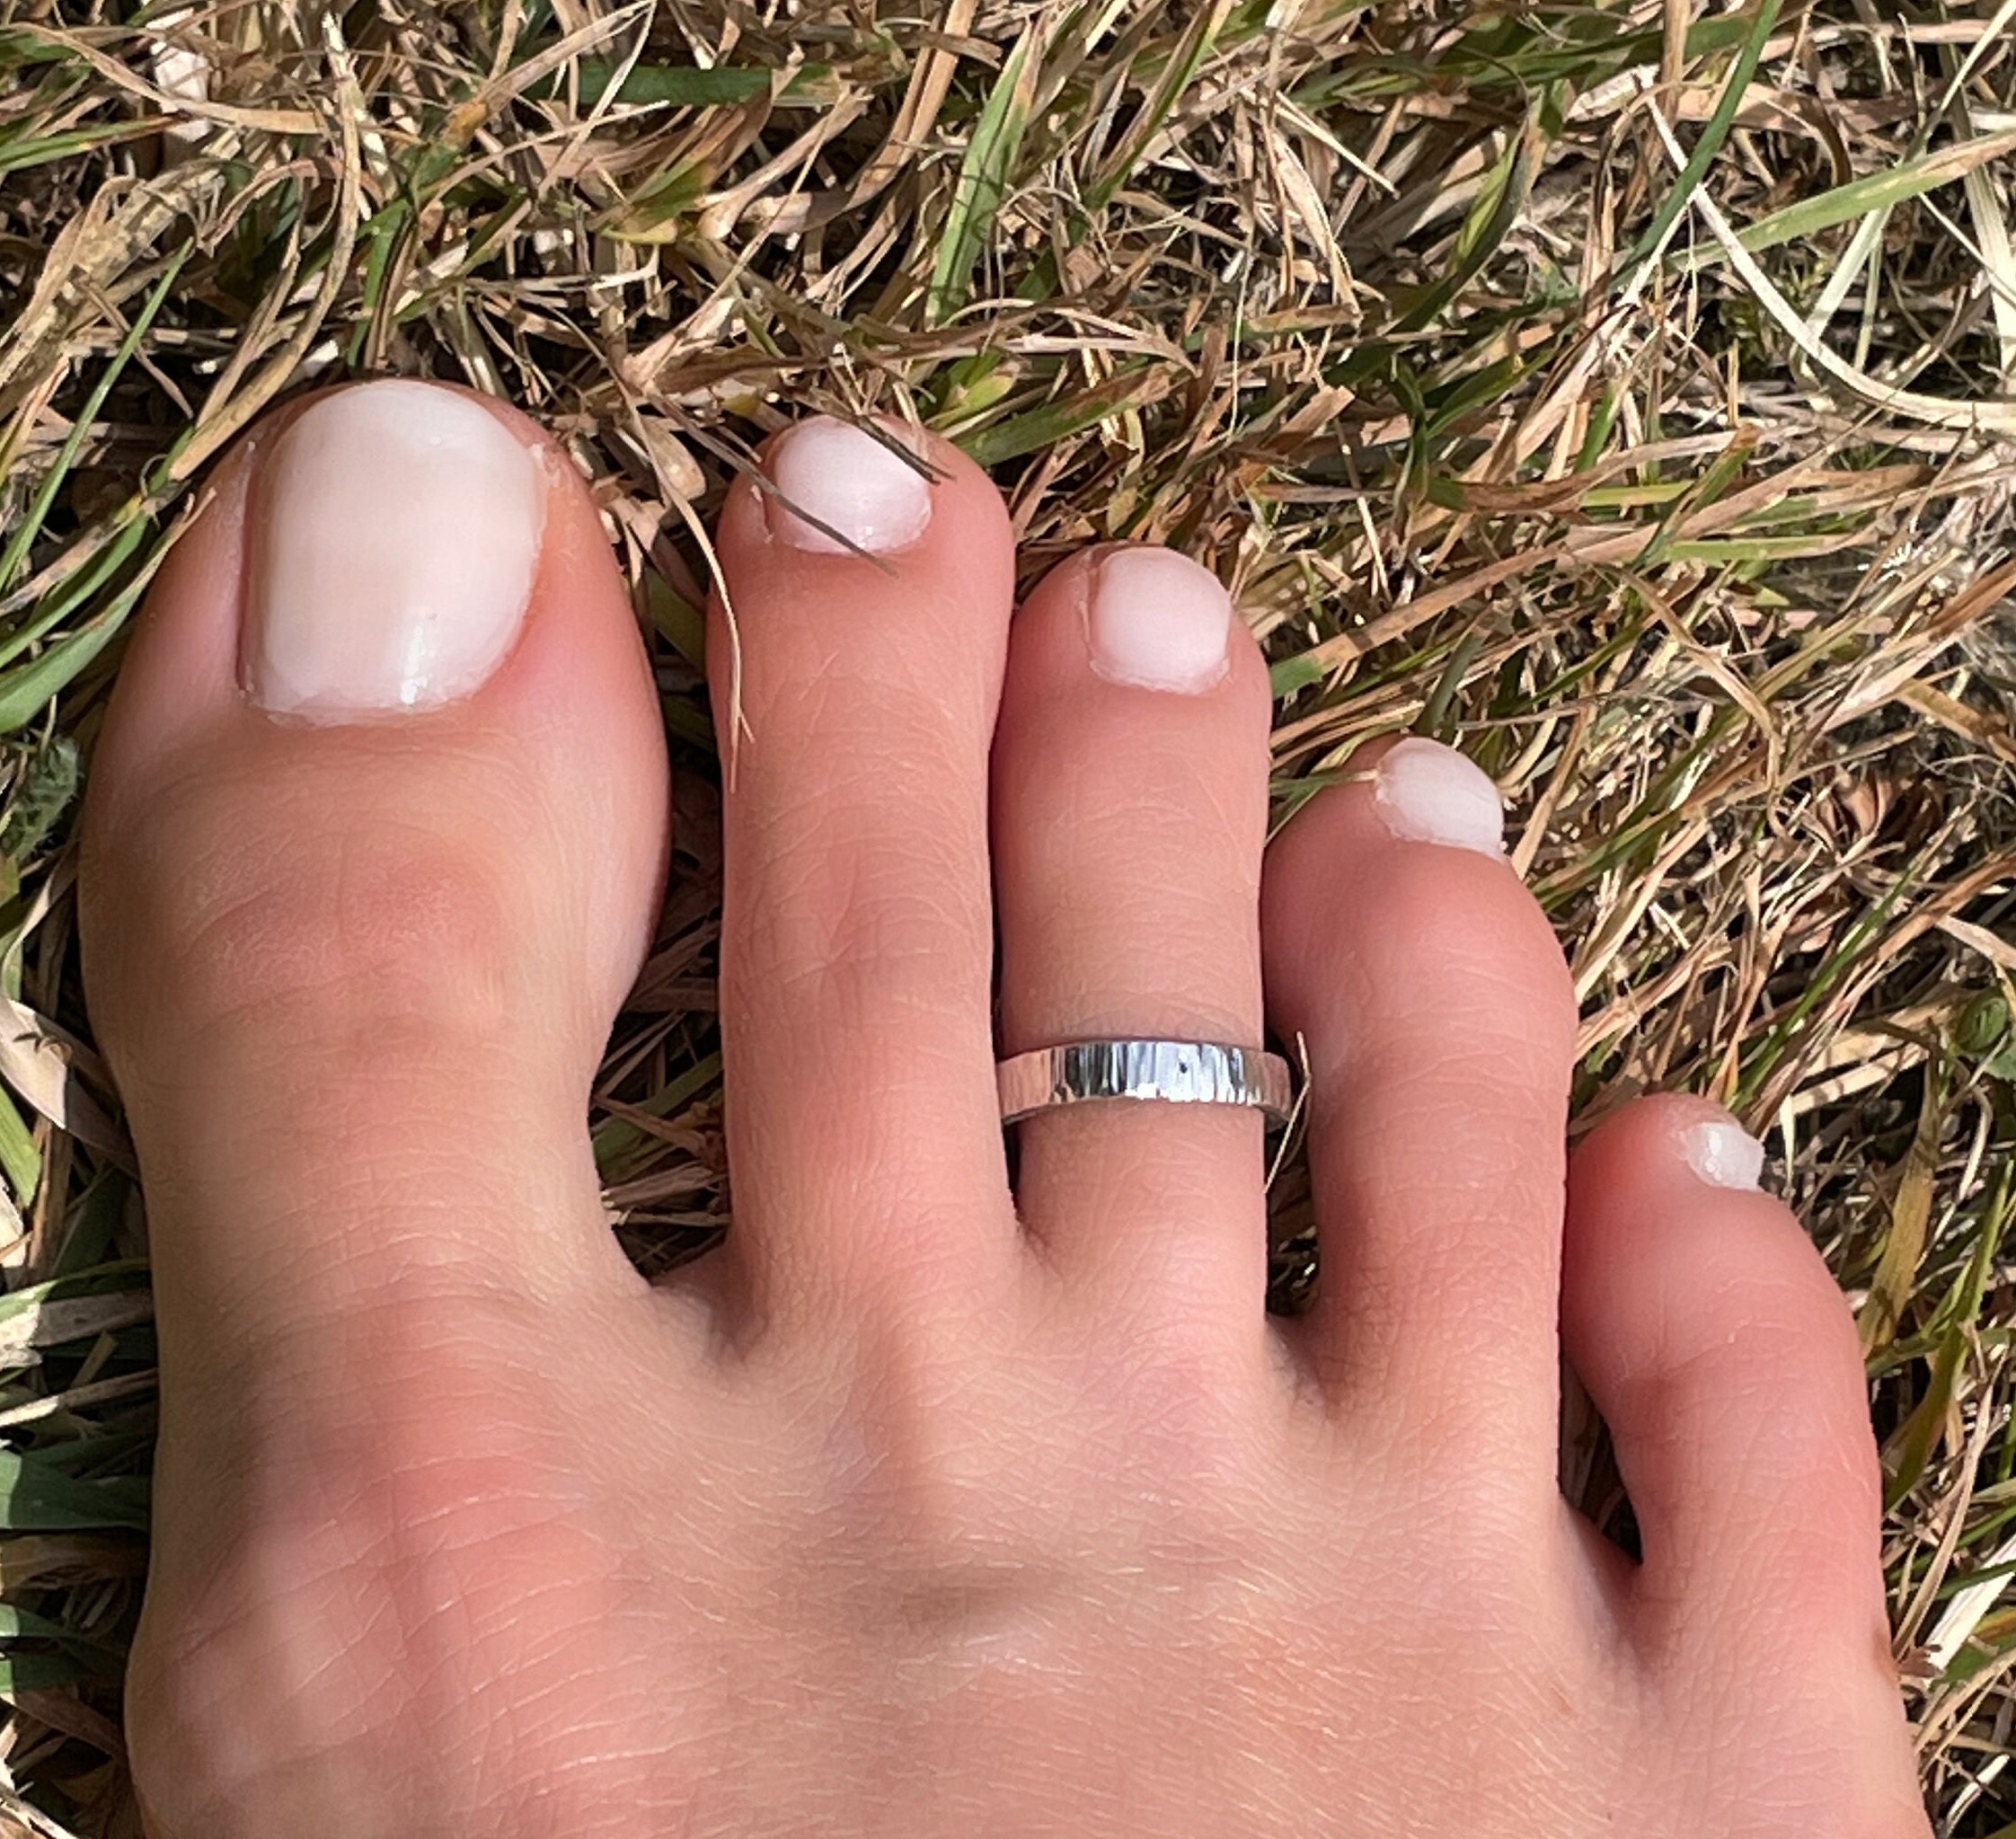 Sterling silver Toe ring (one) – Silver by Nature